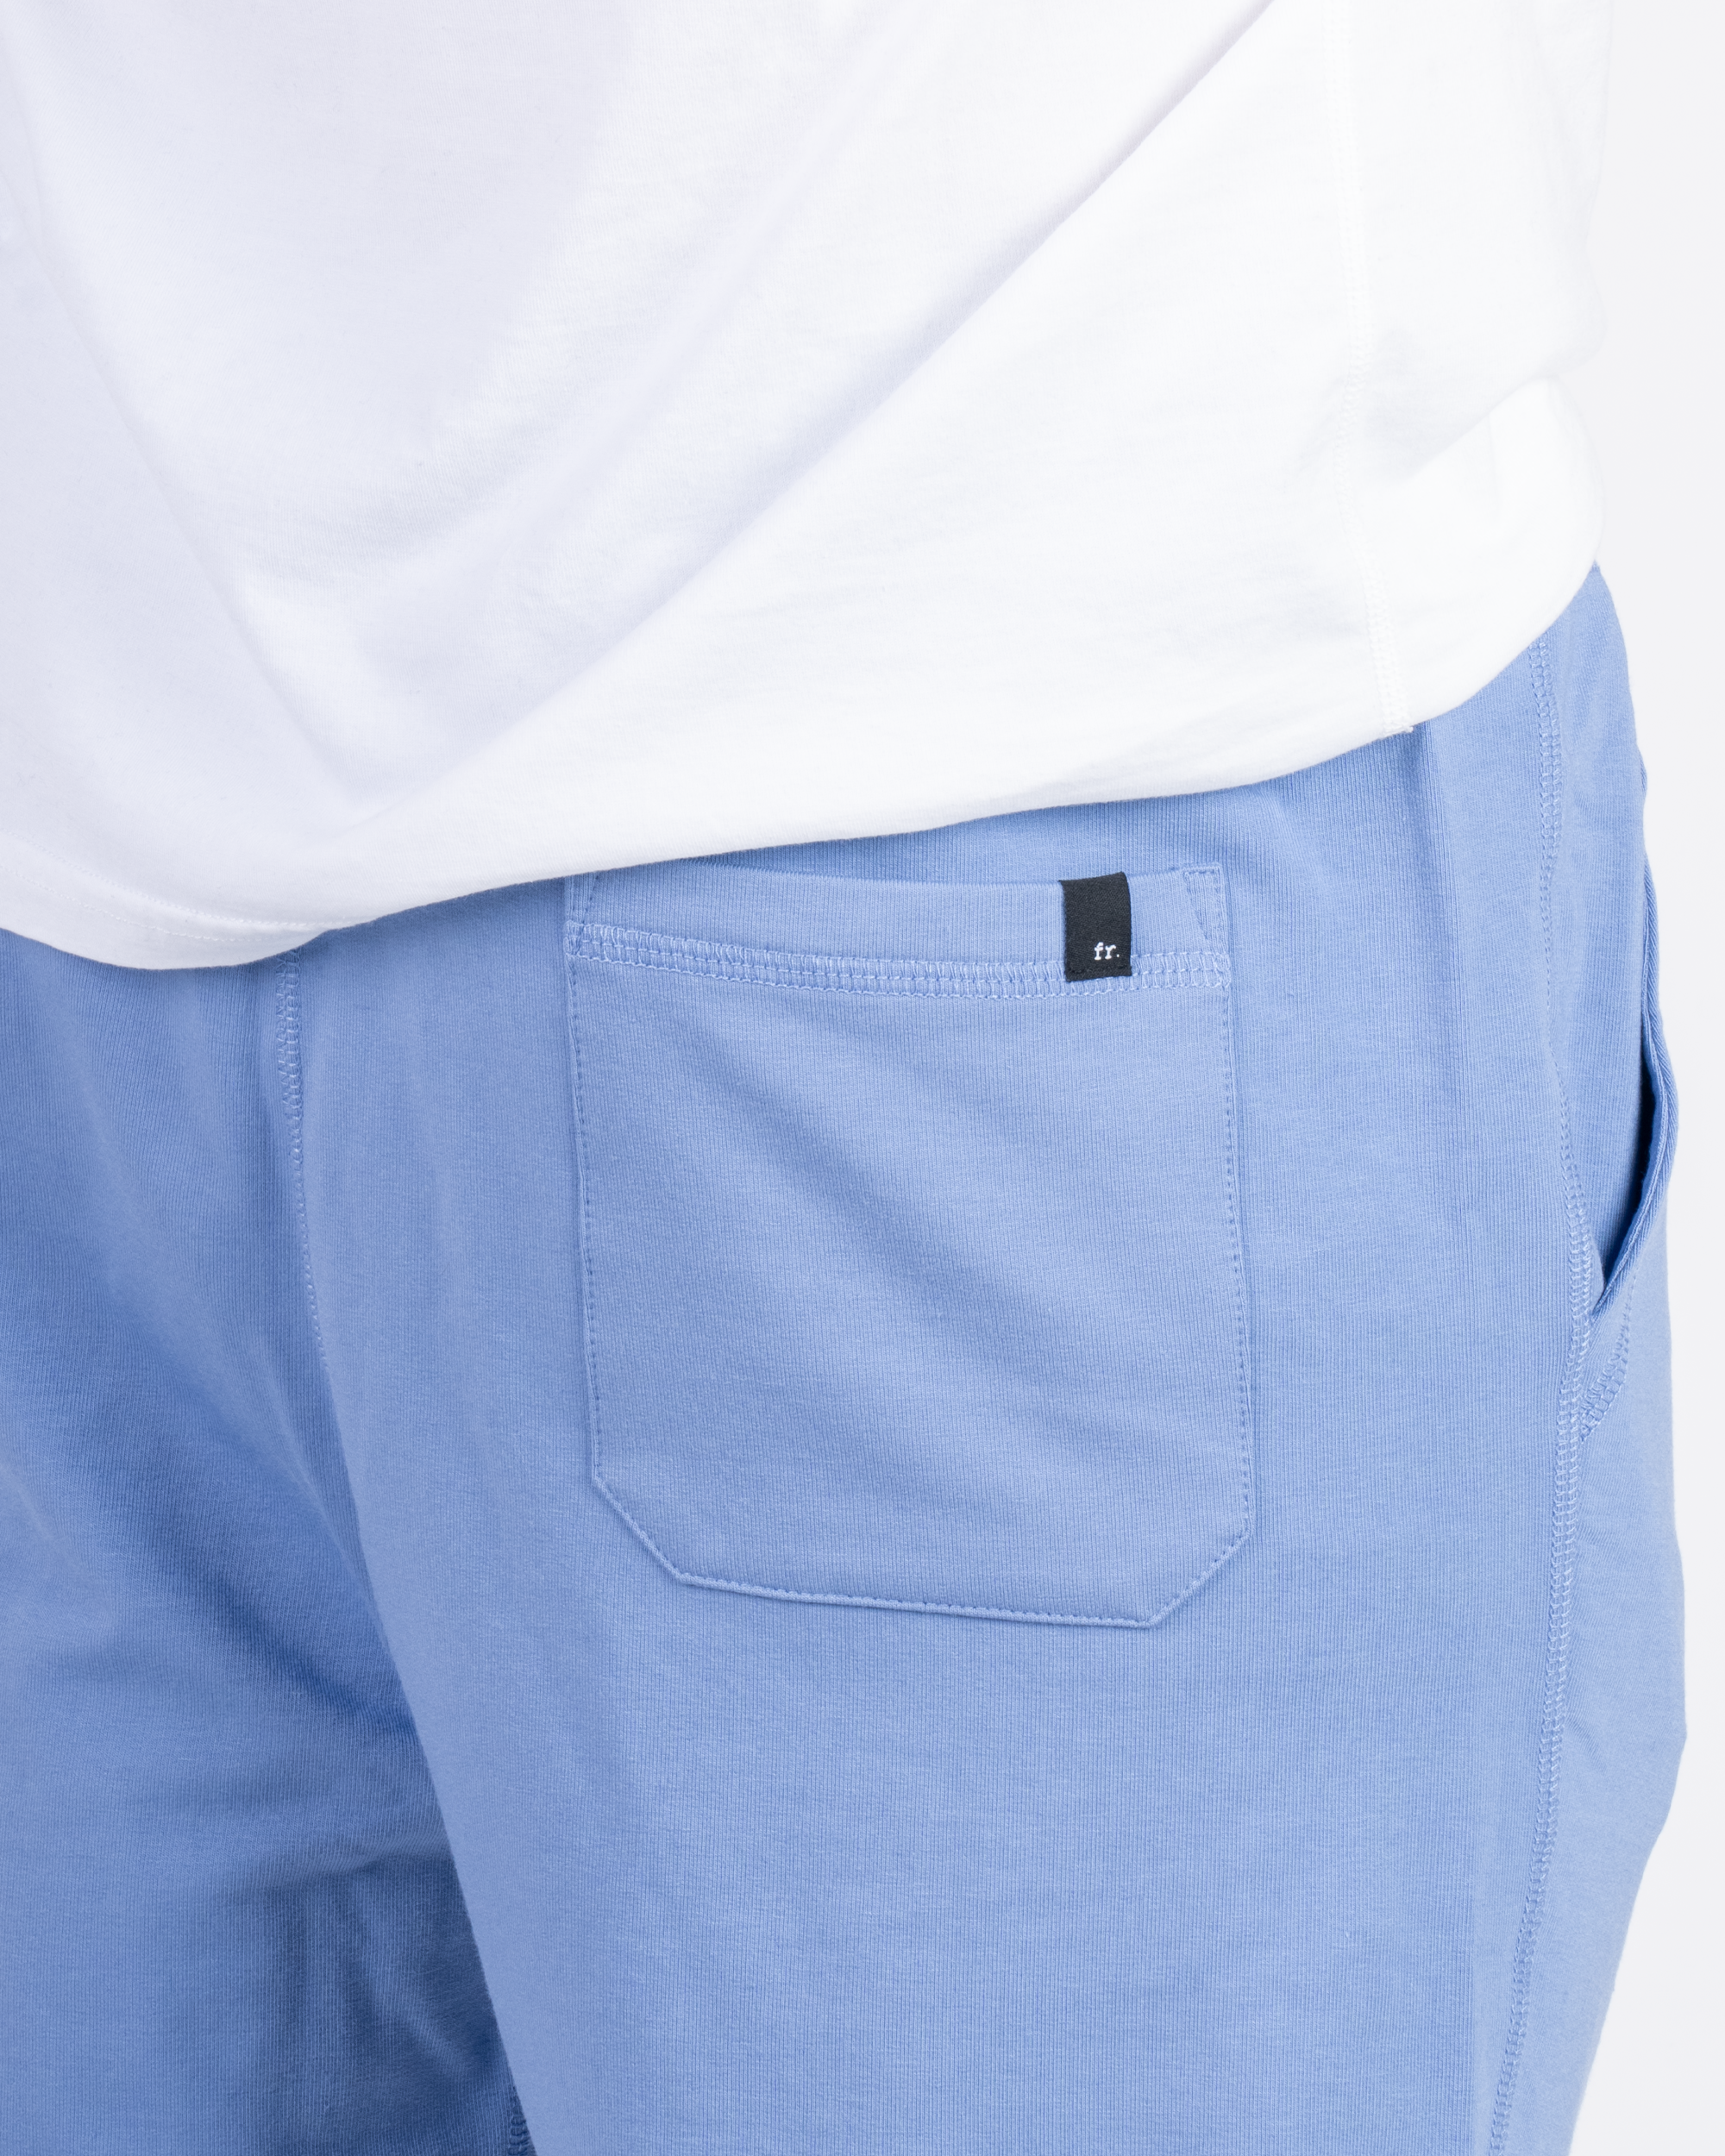 Foreign Rider Co Technical Fabric Metallic Blue Jogger Back Pocket Detail